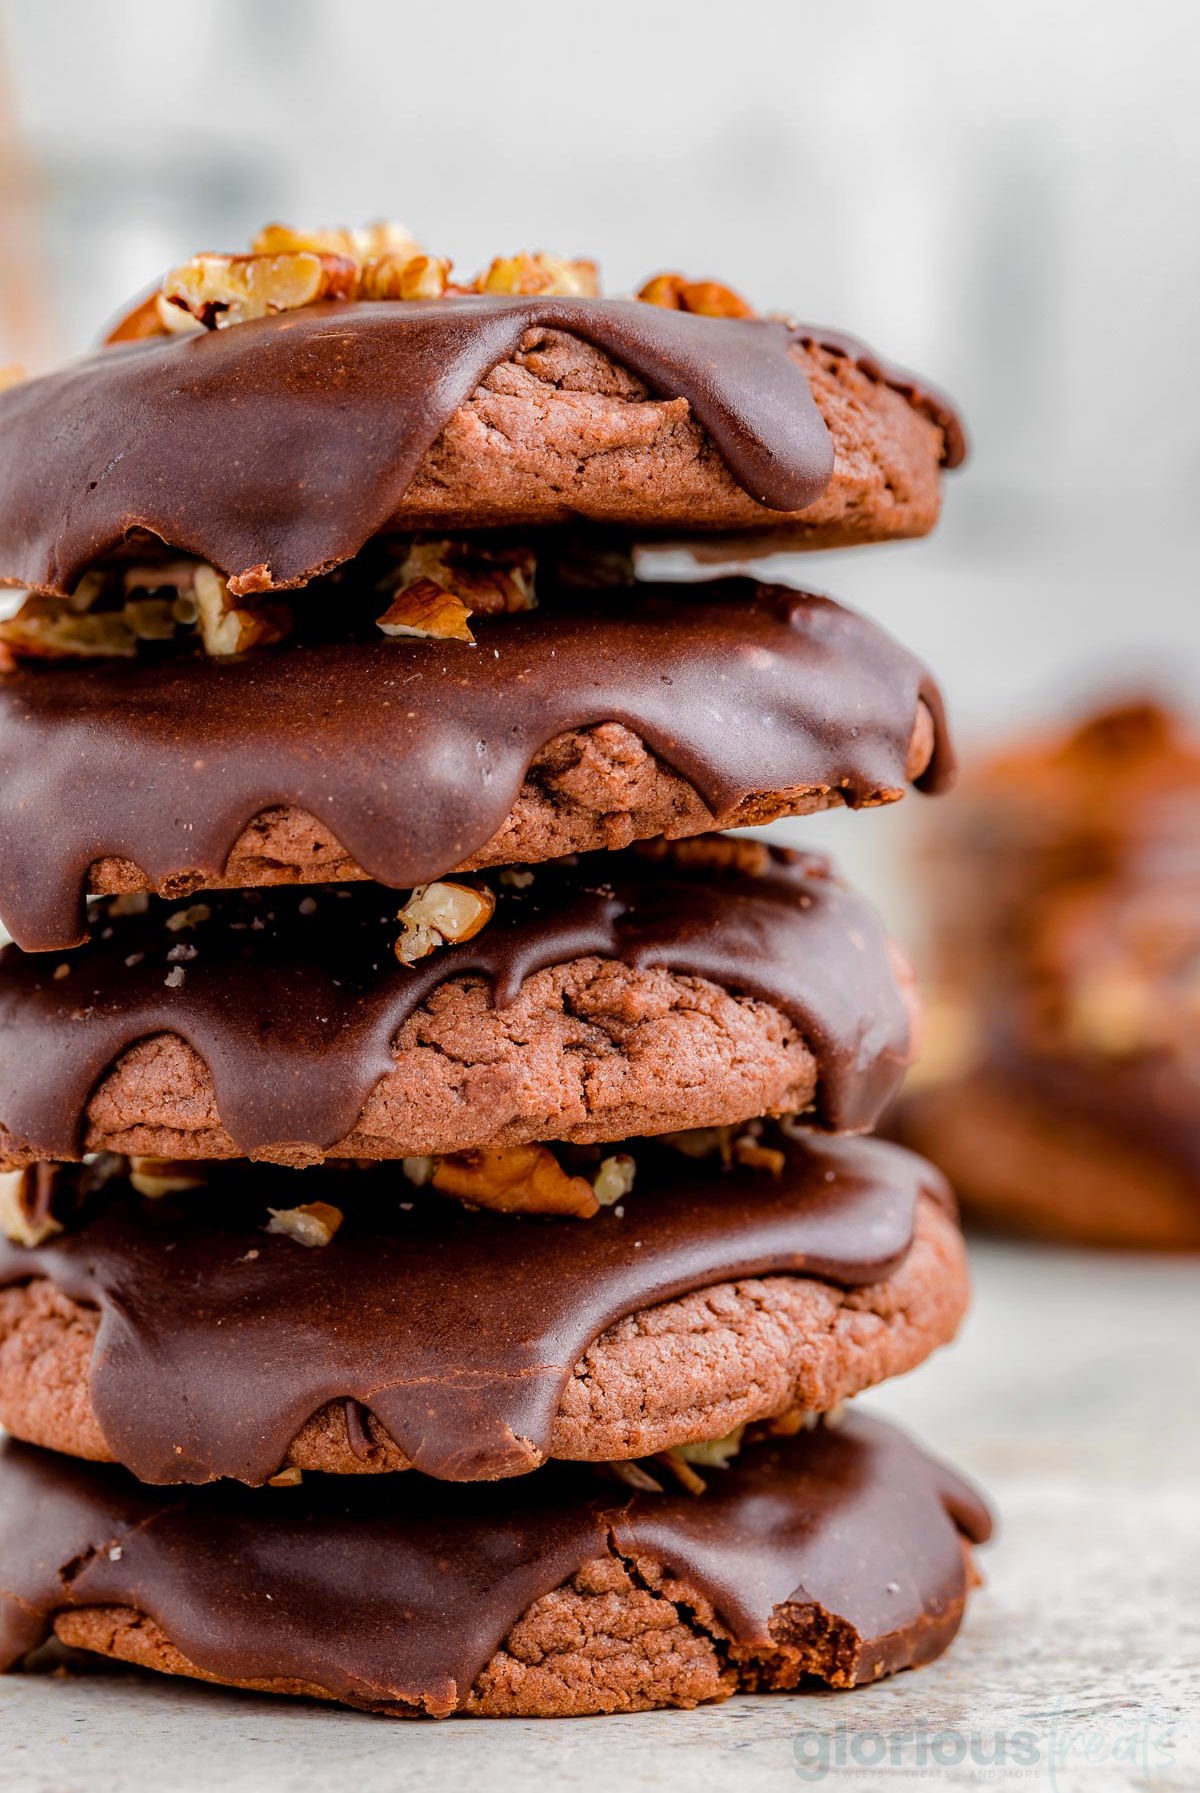 a stack of 5 chocolate cookies with chocolate icing on top and nuts sprinkled on the icing.